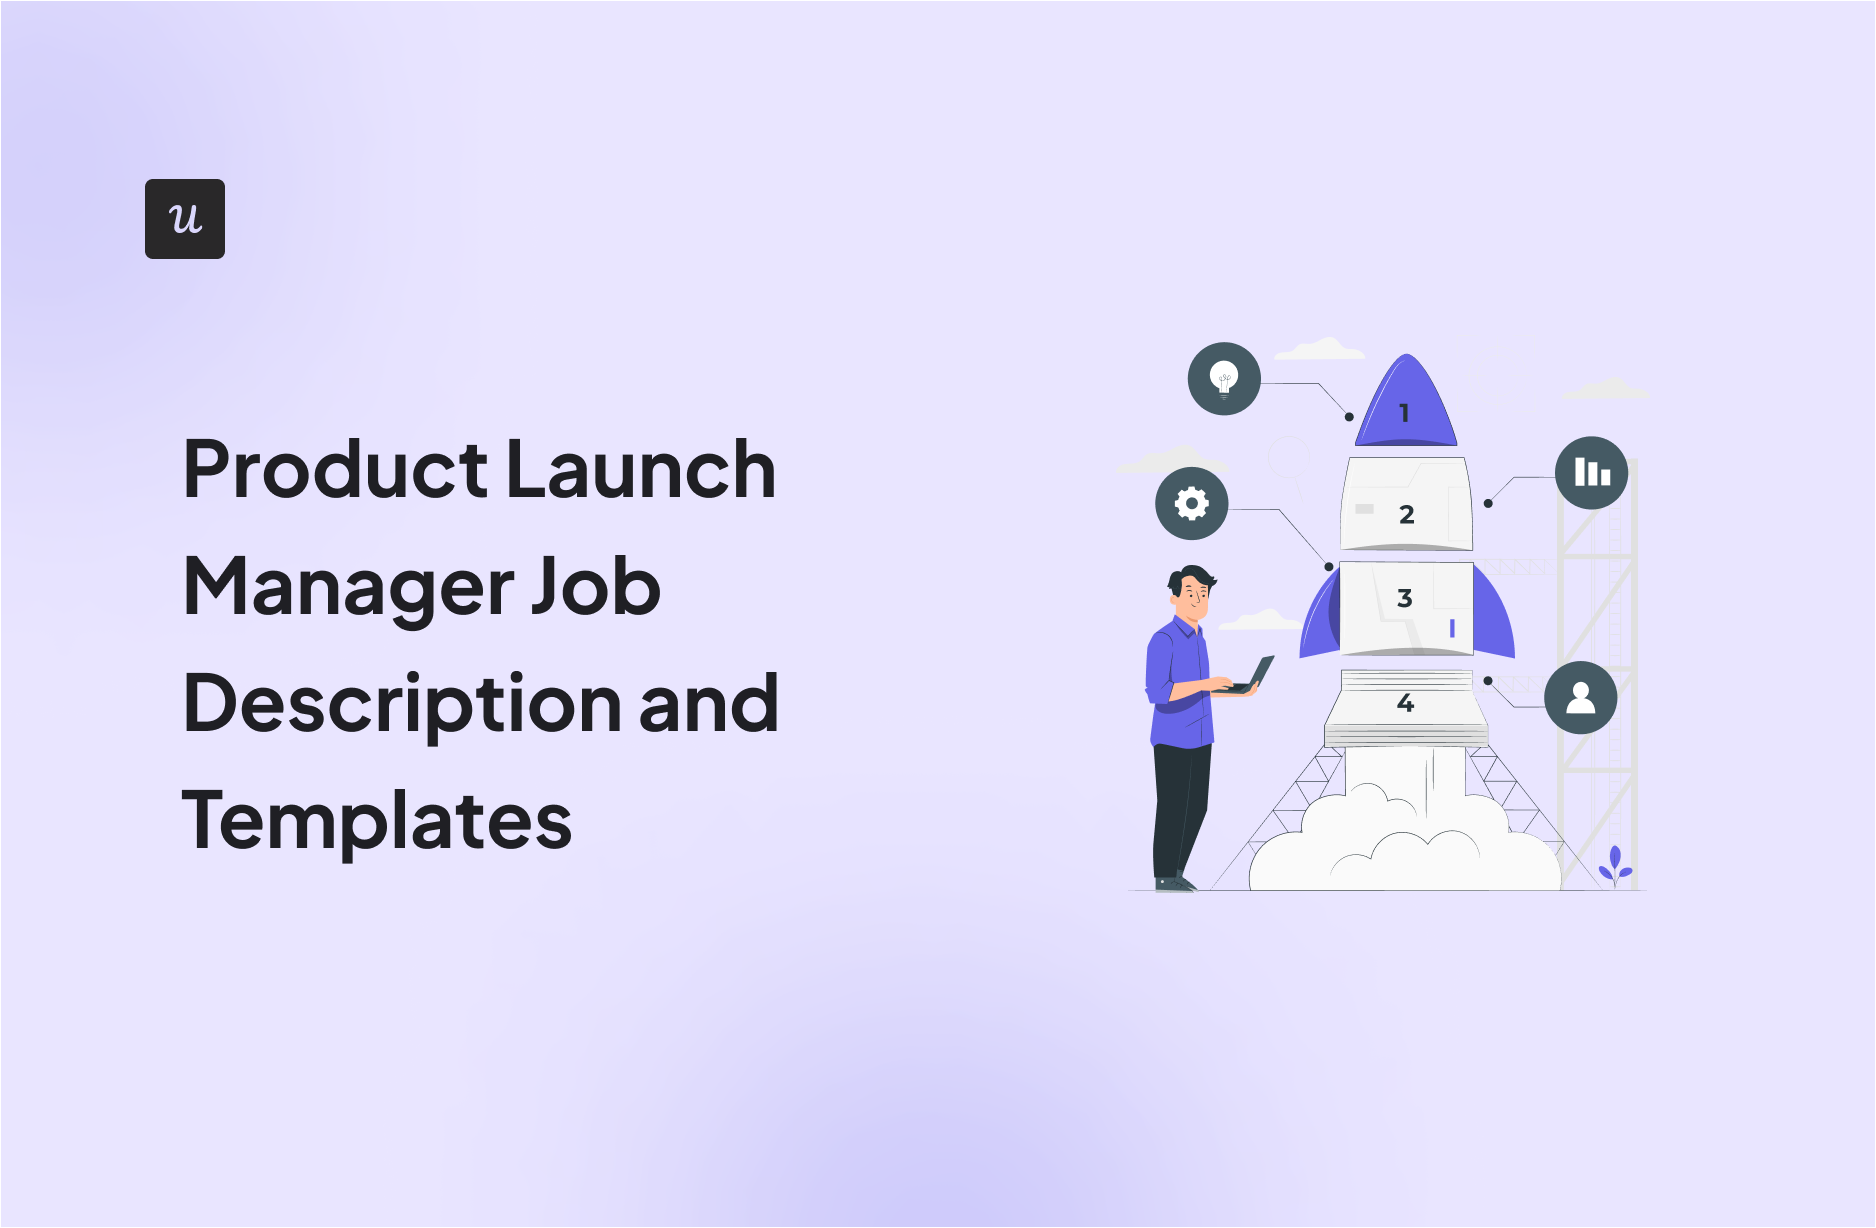 Product Launch Manager Job Description and Templates